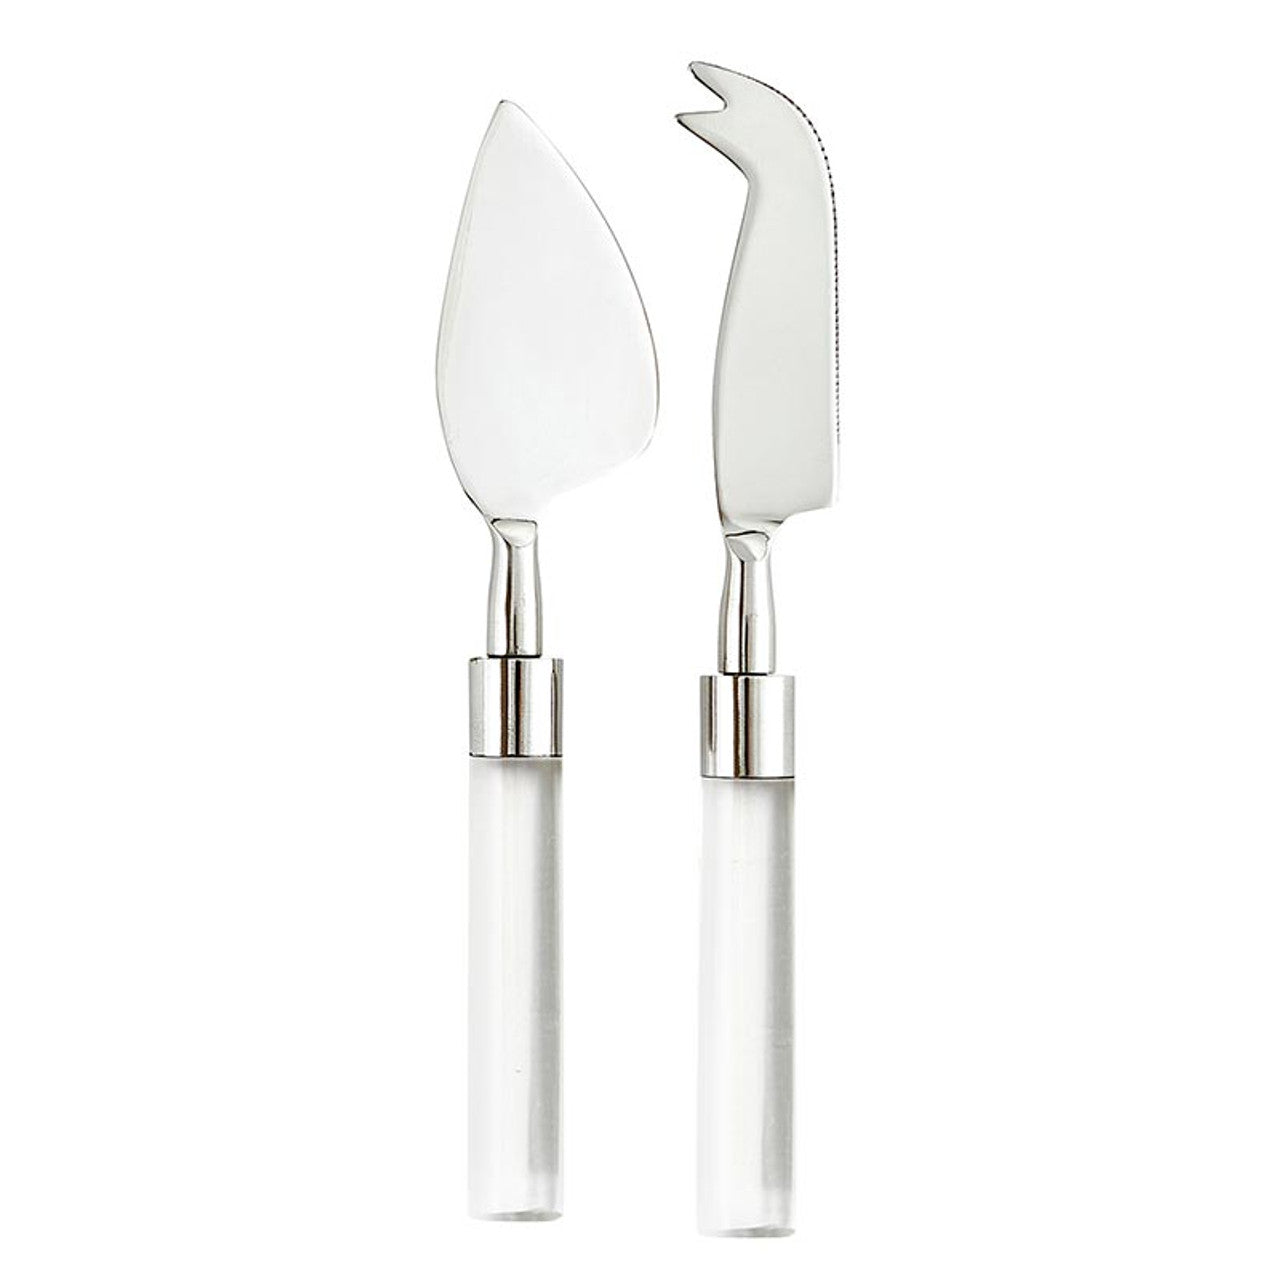 Lucite Cheese Knives - Set of 2